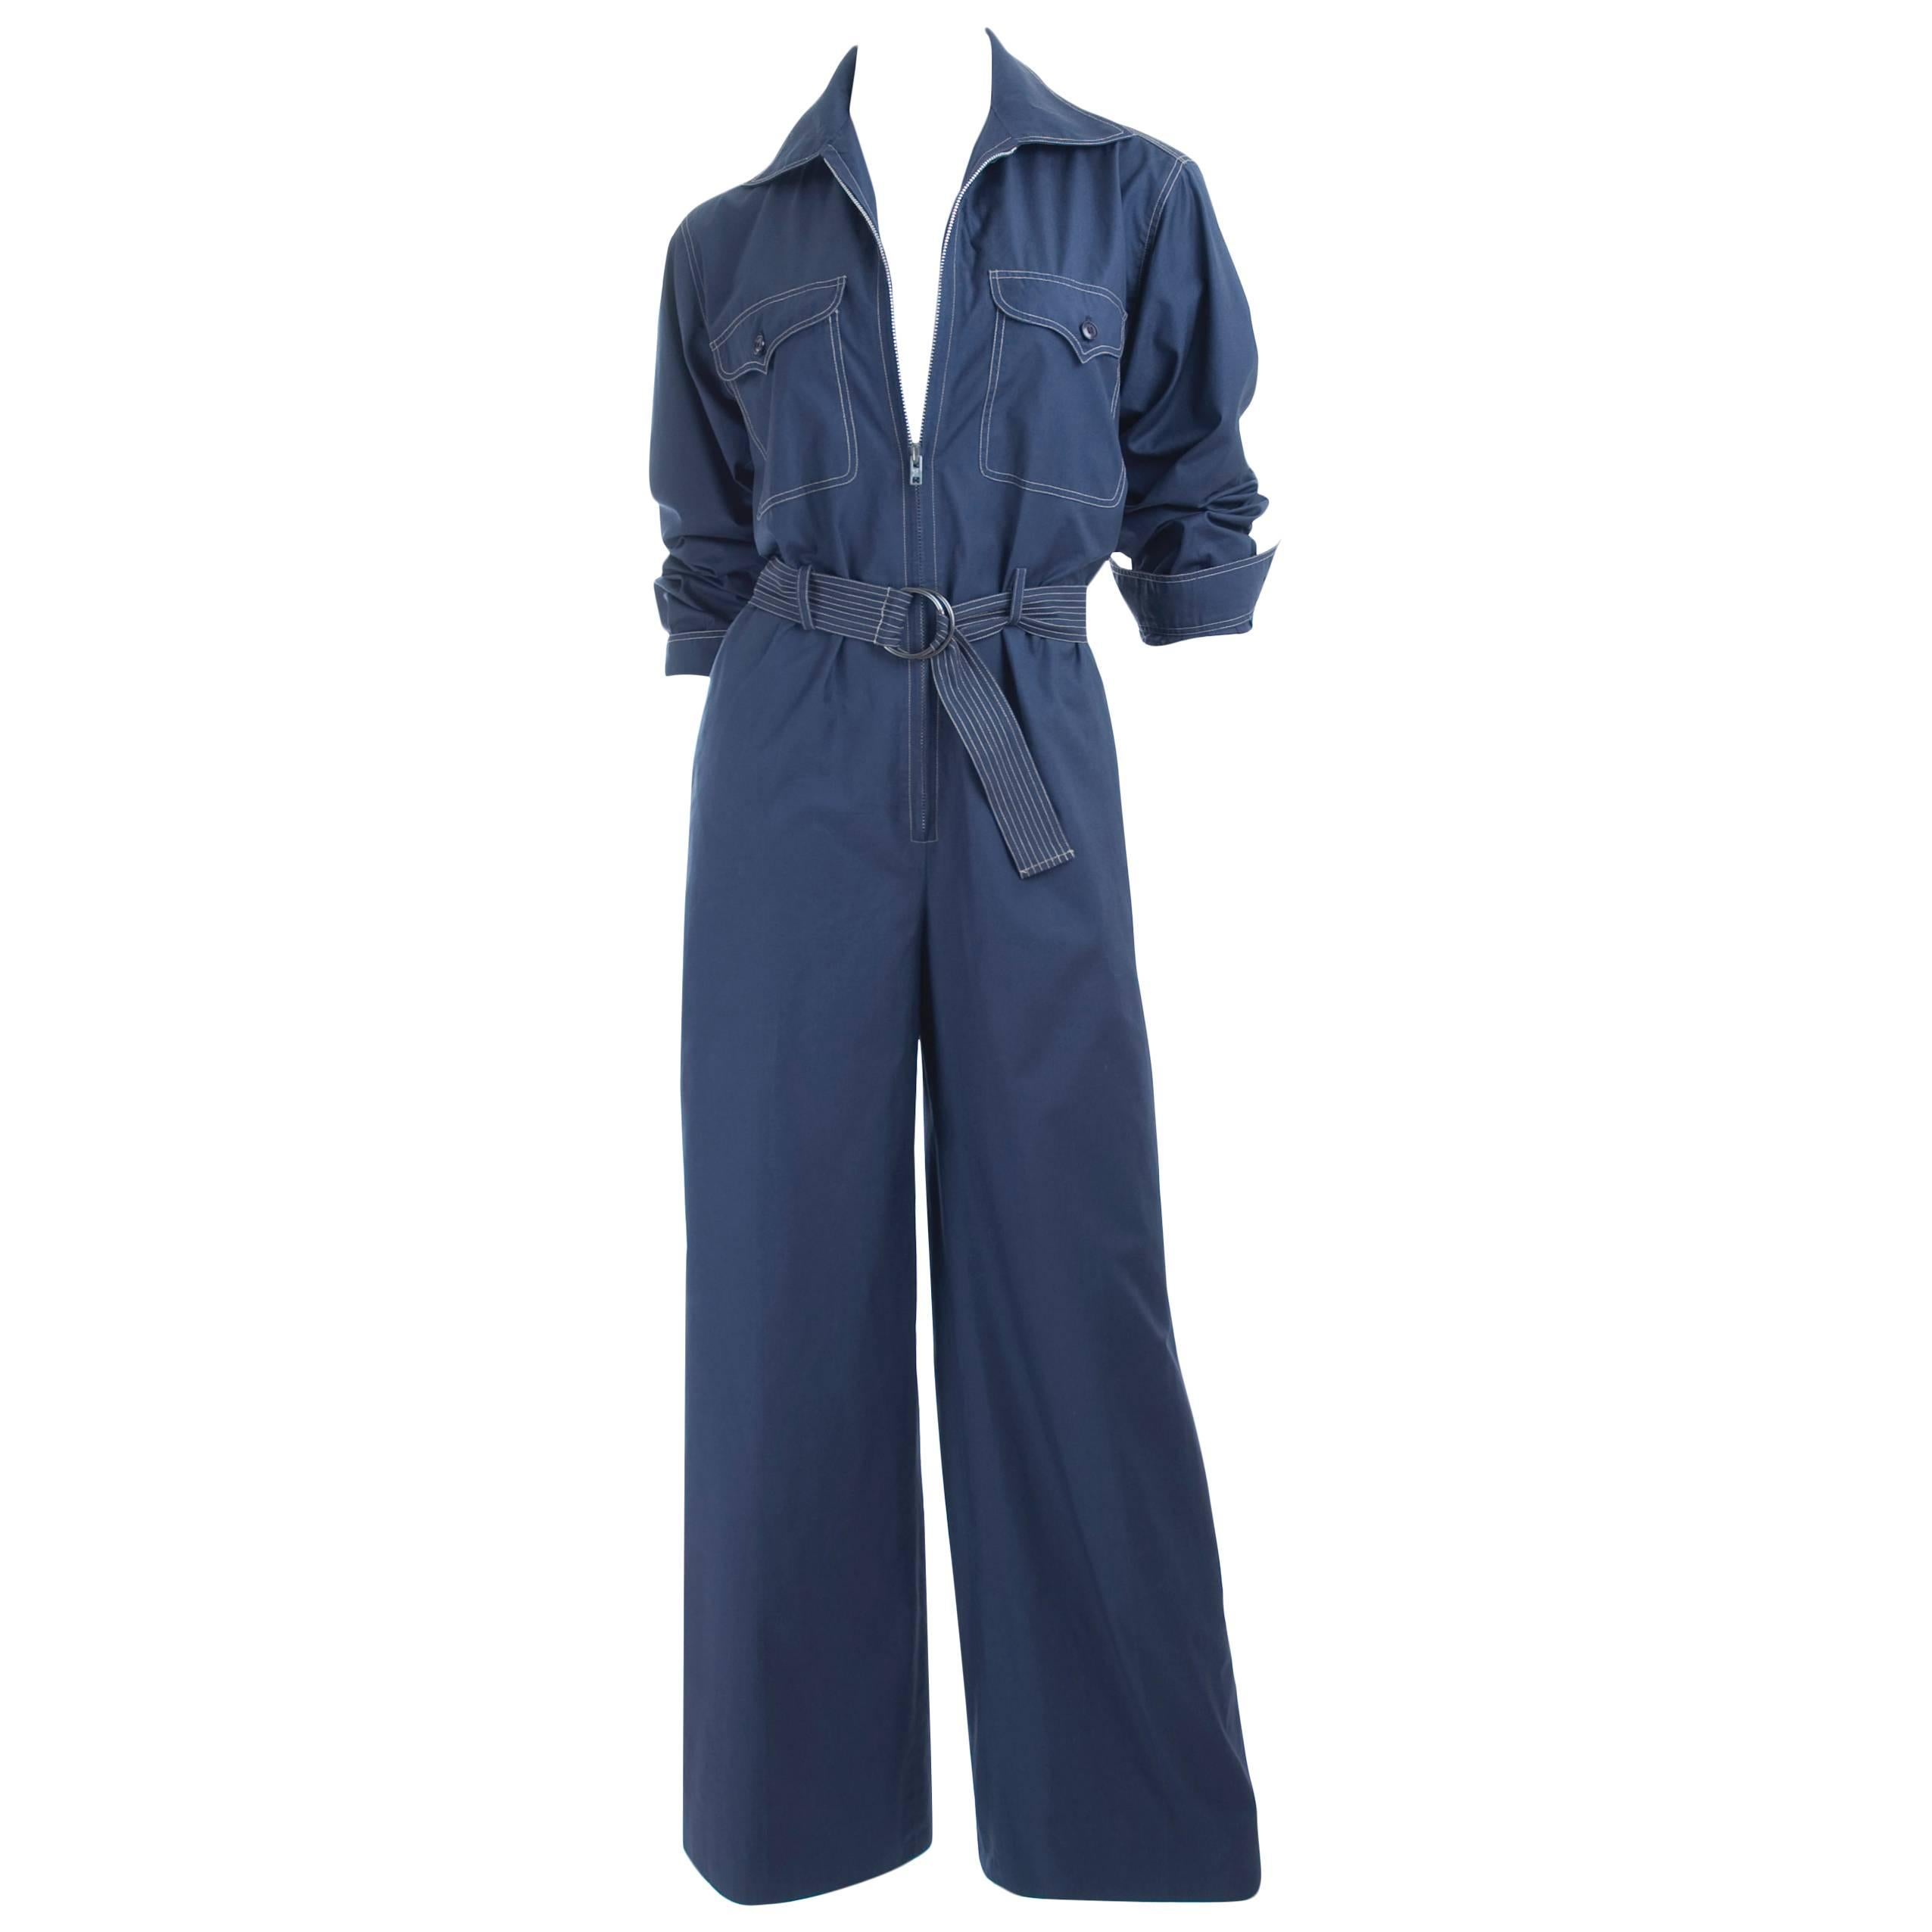 RARE Vintage 1970 Yves Saint Laurent Jumpsuit Navy with Contrast Stitching For Sale